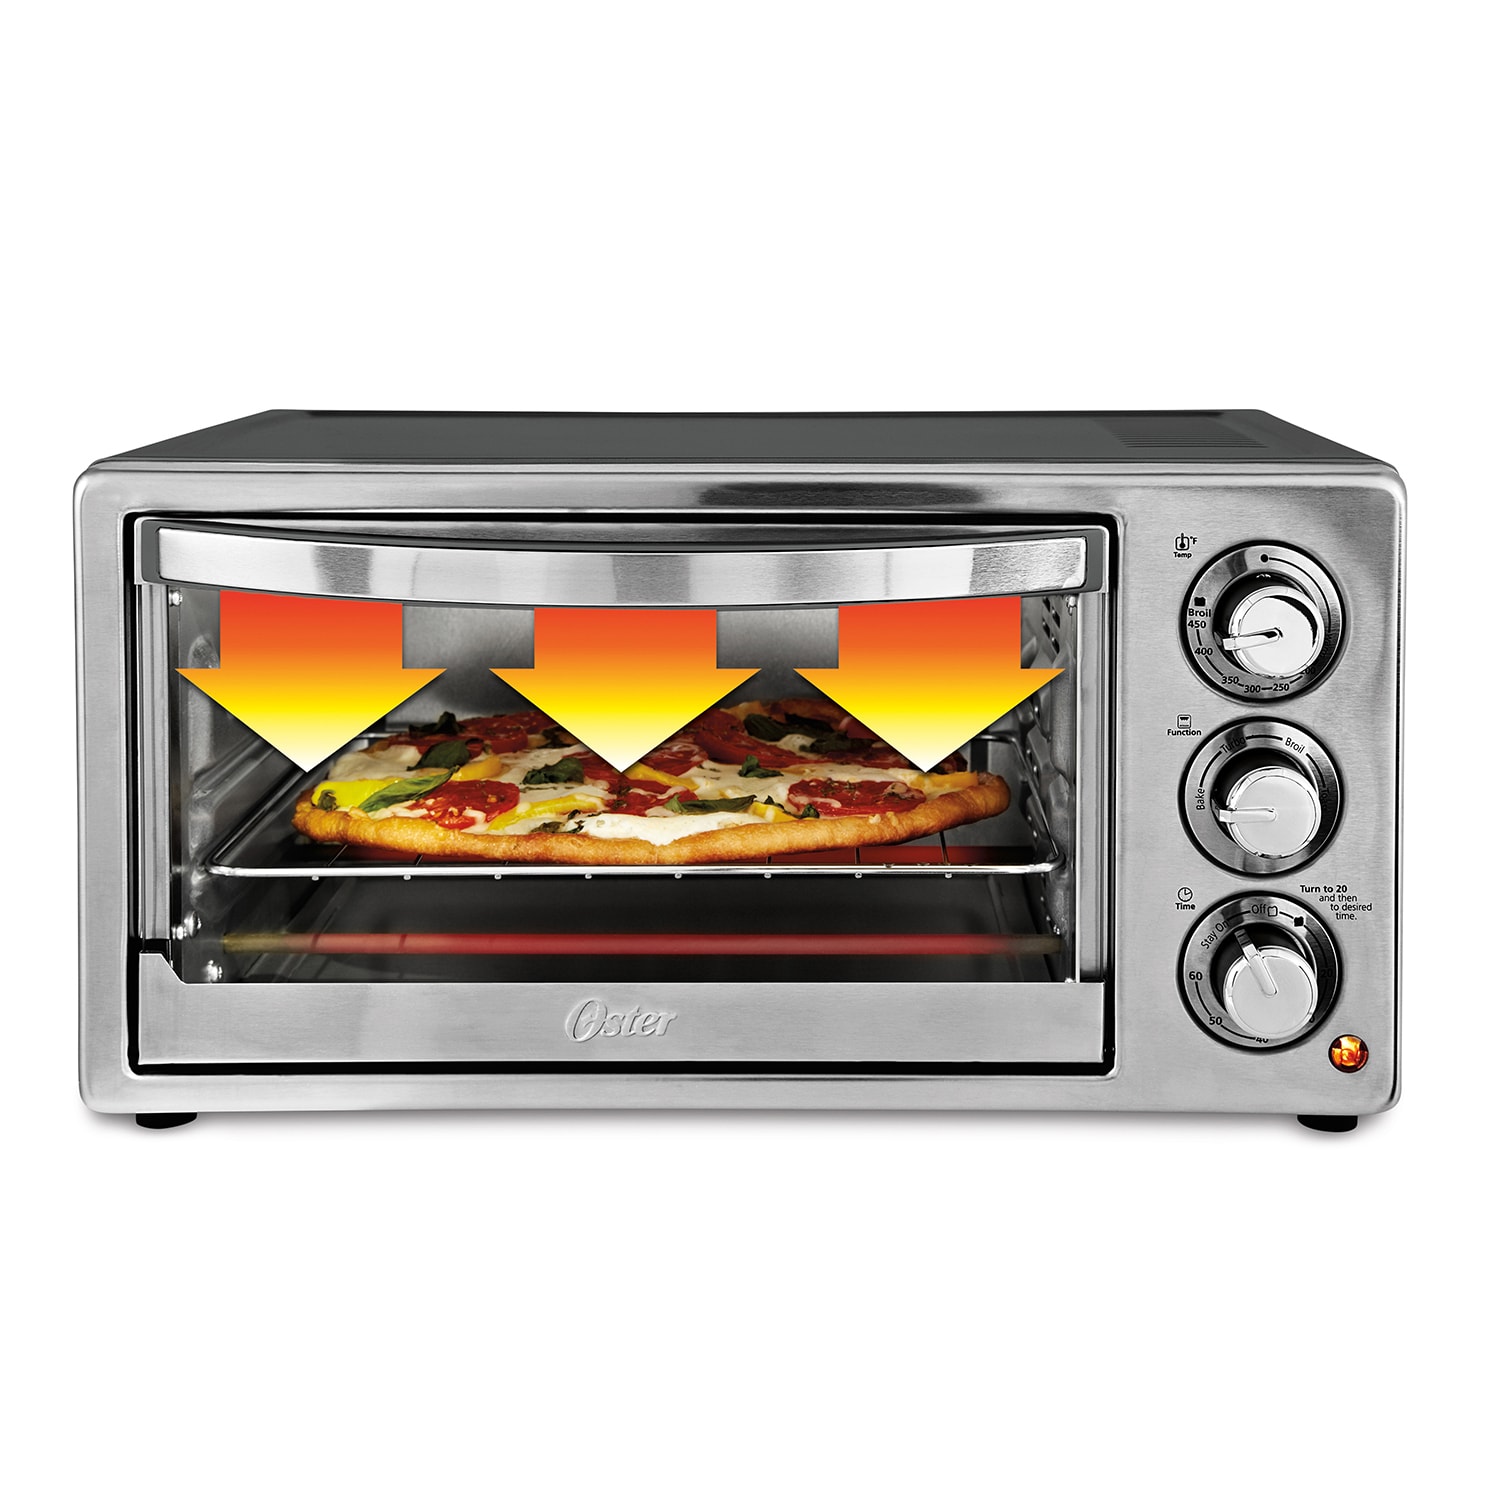 (kohls cardholders) Oster 6-Slice Convection Toaster Oven $20 + free s